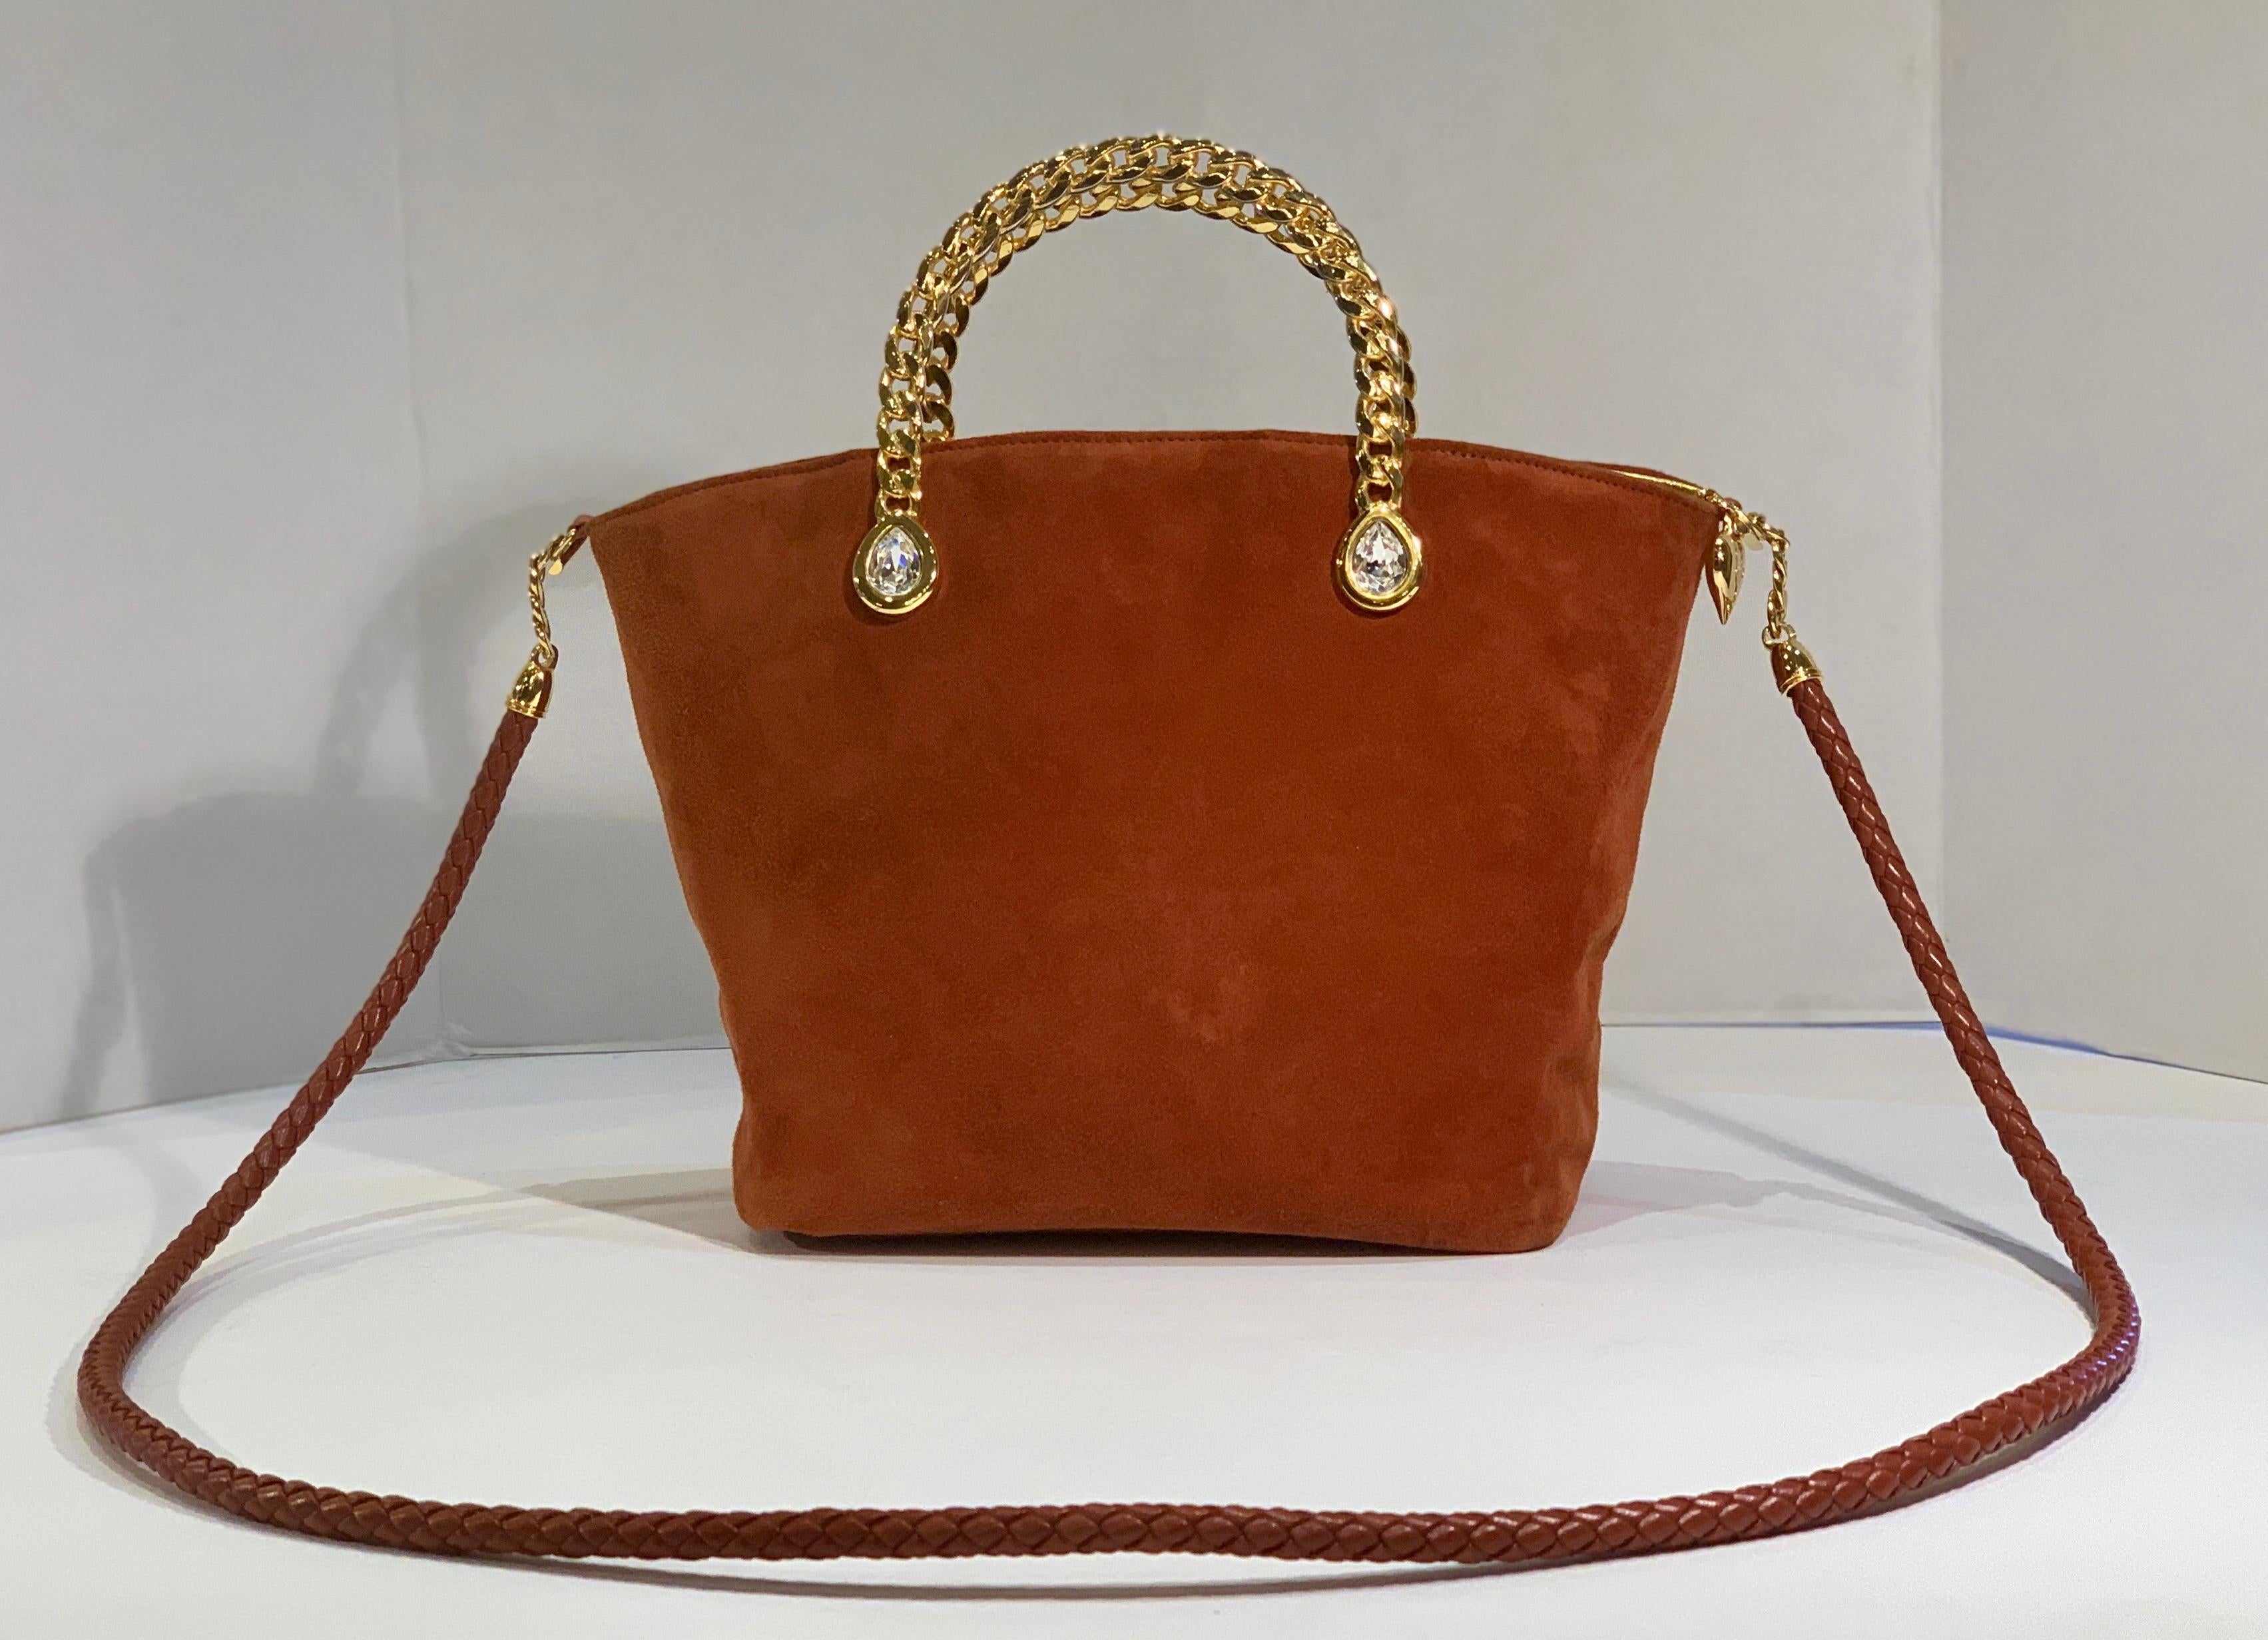 Luxurious, ultra-soft suede handbag or evening purse from Fred Hayman Beverly Hills, the creator of Giorgio Beverly Hills.  Small bucket style bag features large, pear shape Swarovski crystal embellishments, bezel set in shiny gold color metal